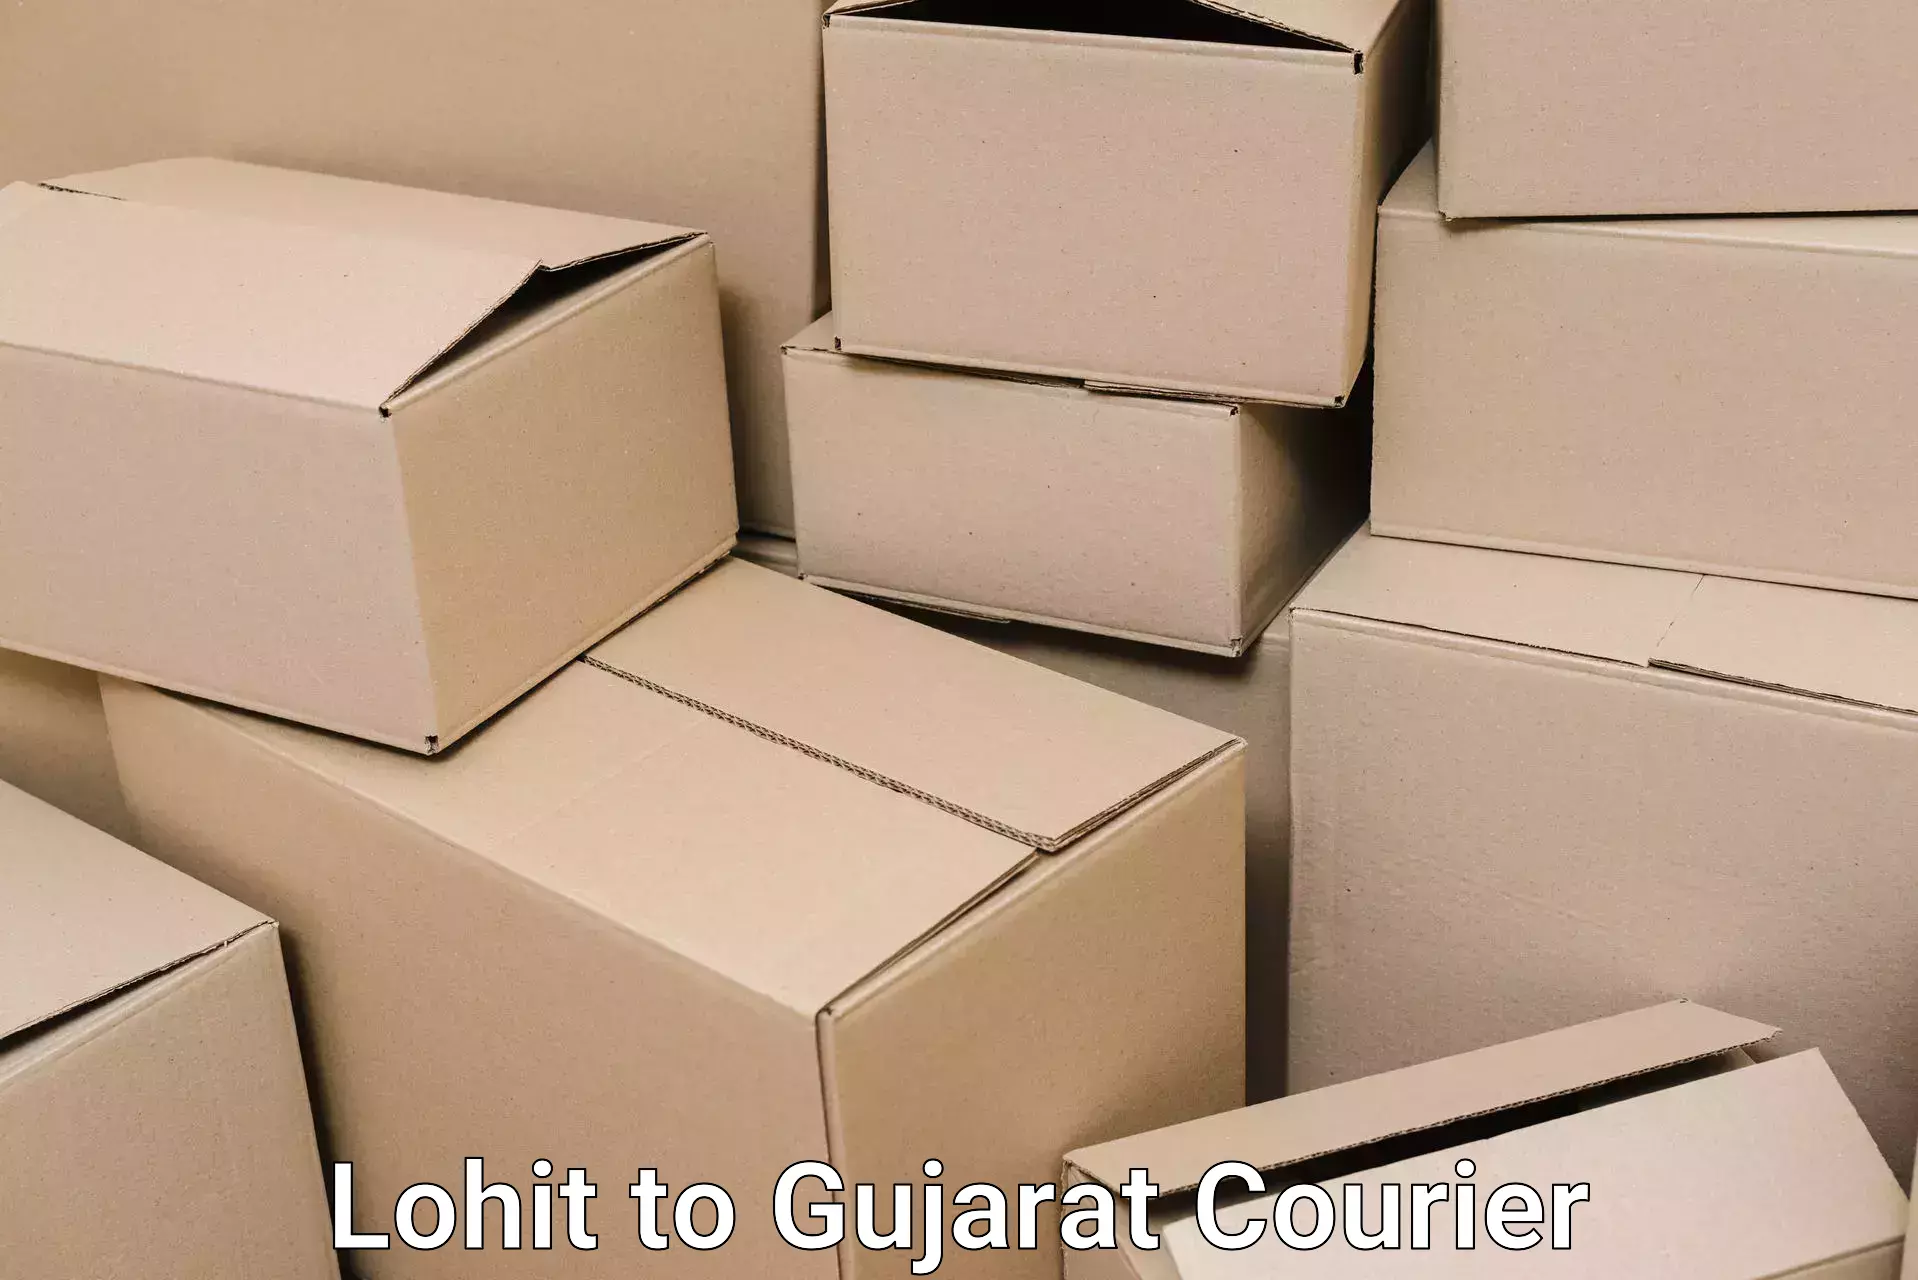 Furniture transport specialists Lohit to Mehsana